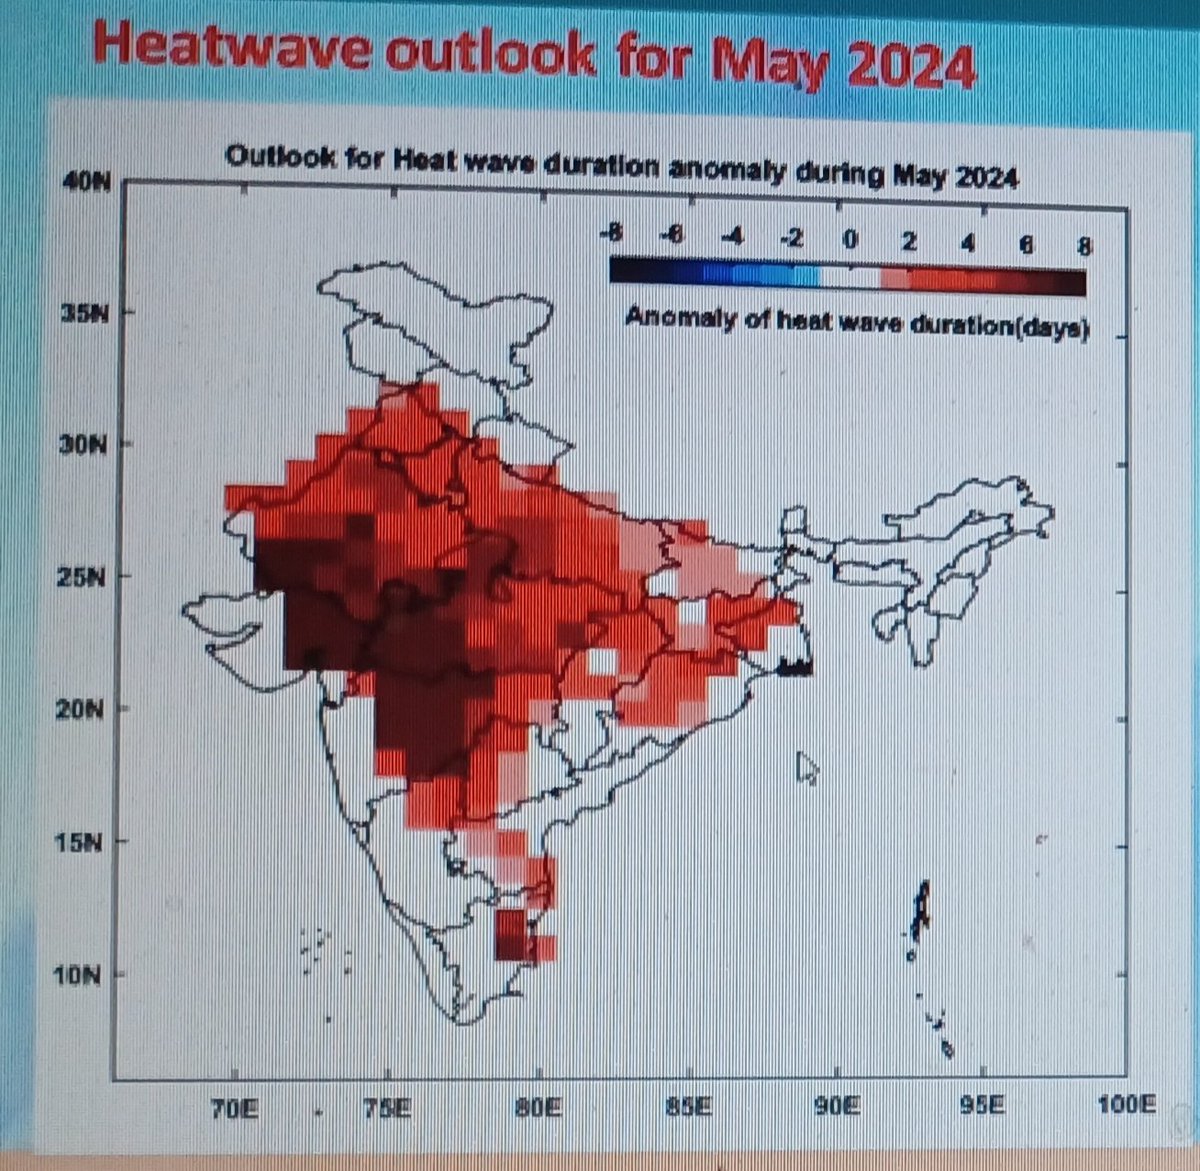 Heatwave days will be above normal days in May 2024. The normal #heatwave days in North, Central & South regions is 3 days only. But this month, there will be 2-8 days additional no. of heatwave days in different parts of the country. @santwana99 @NewIndianXpress @Shahid_Faridi_